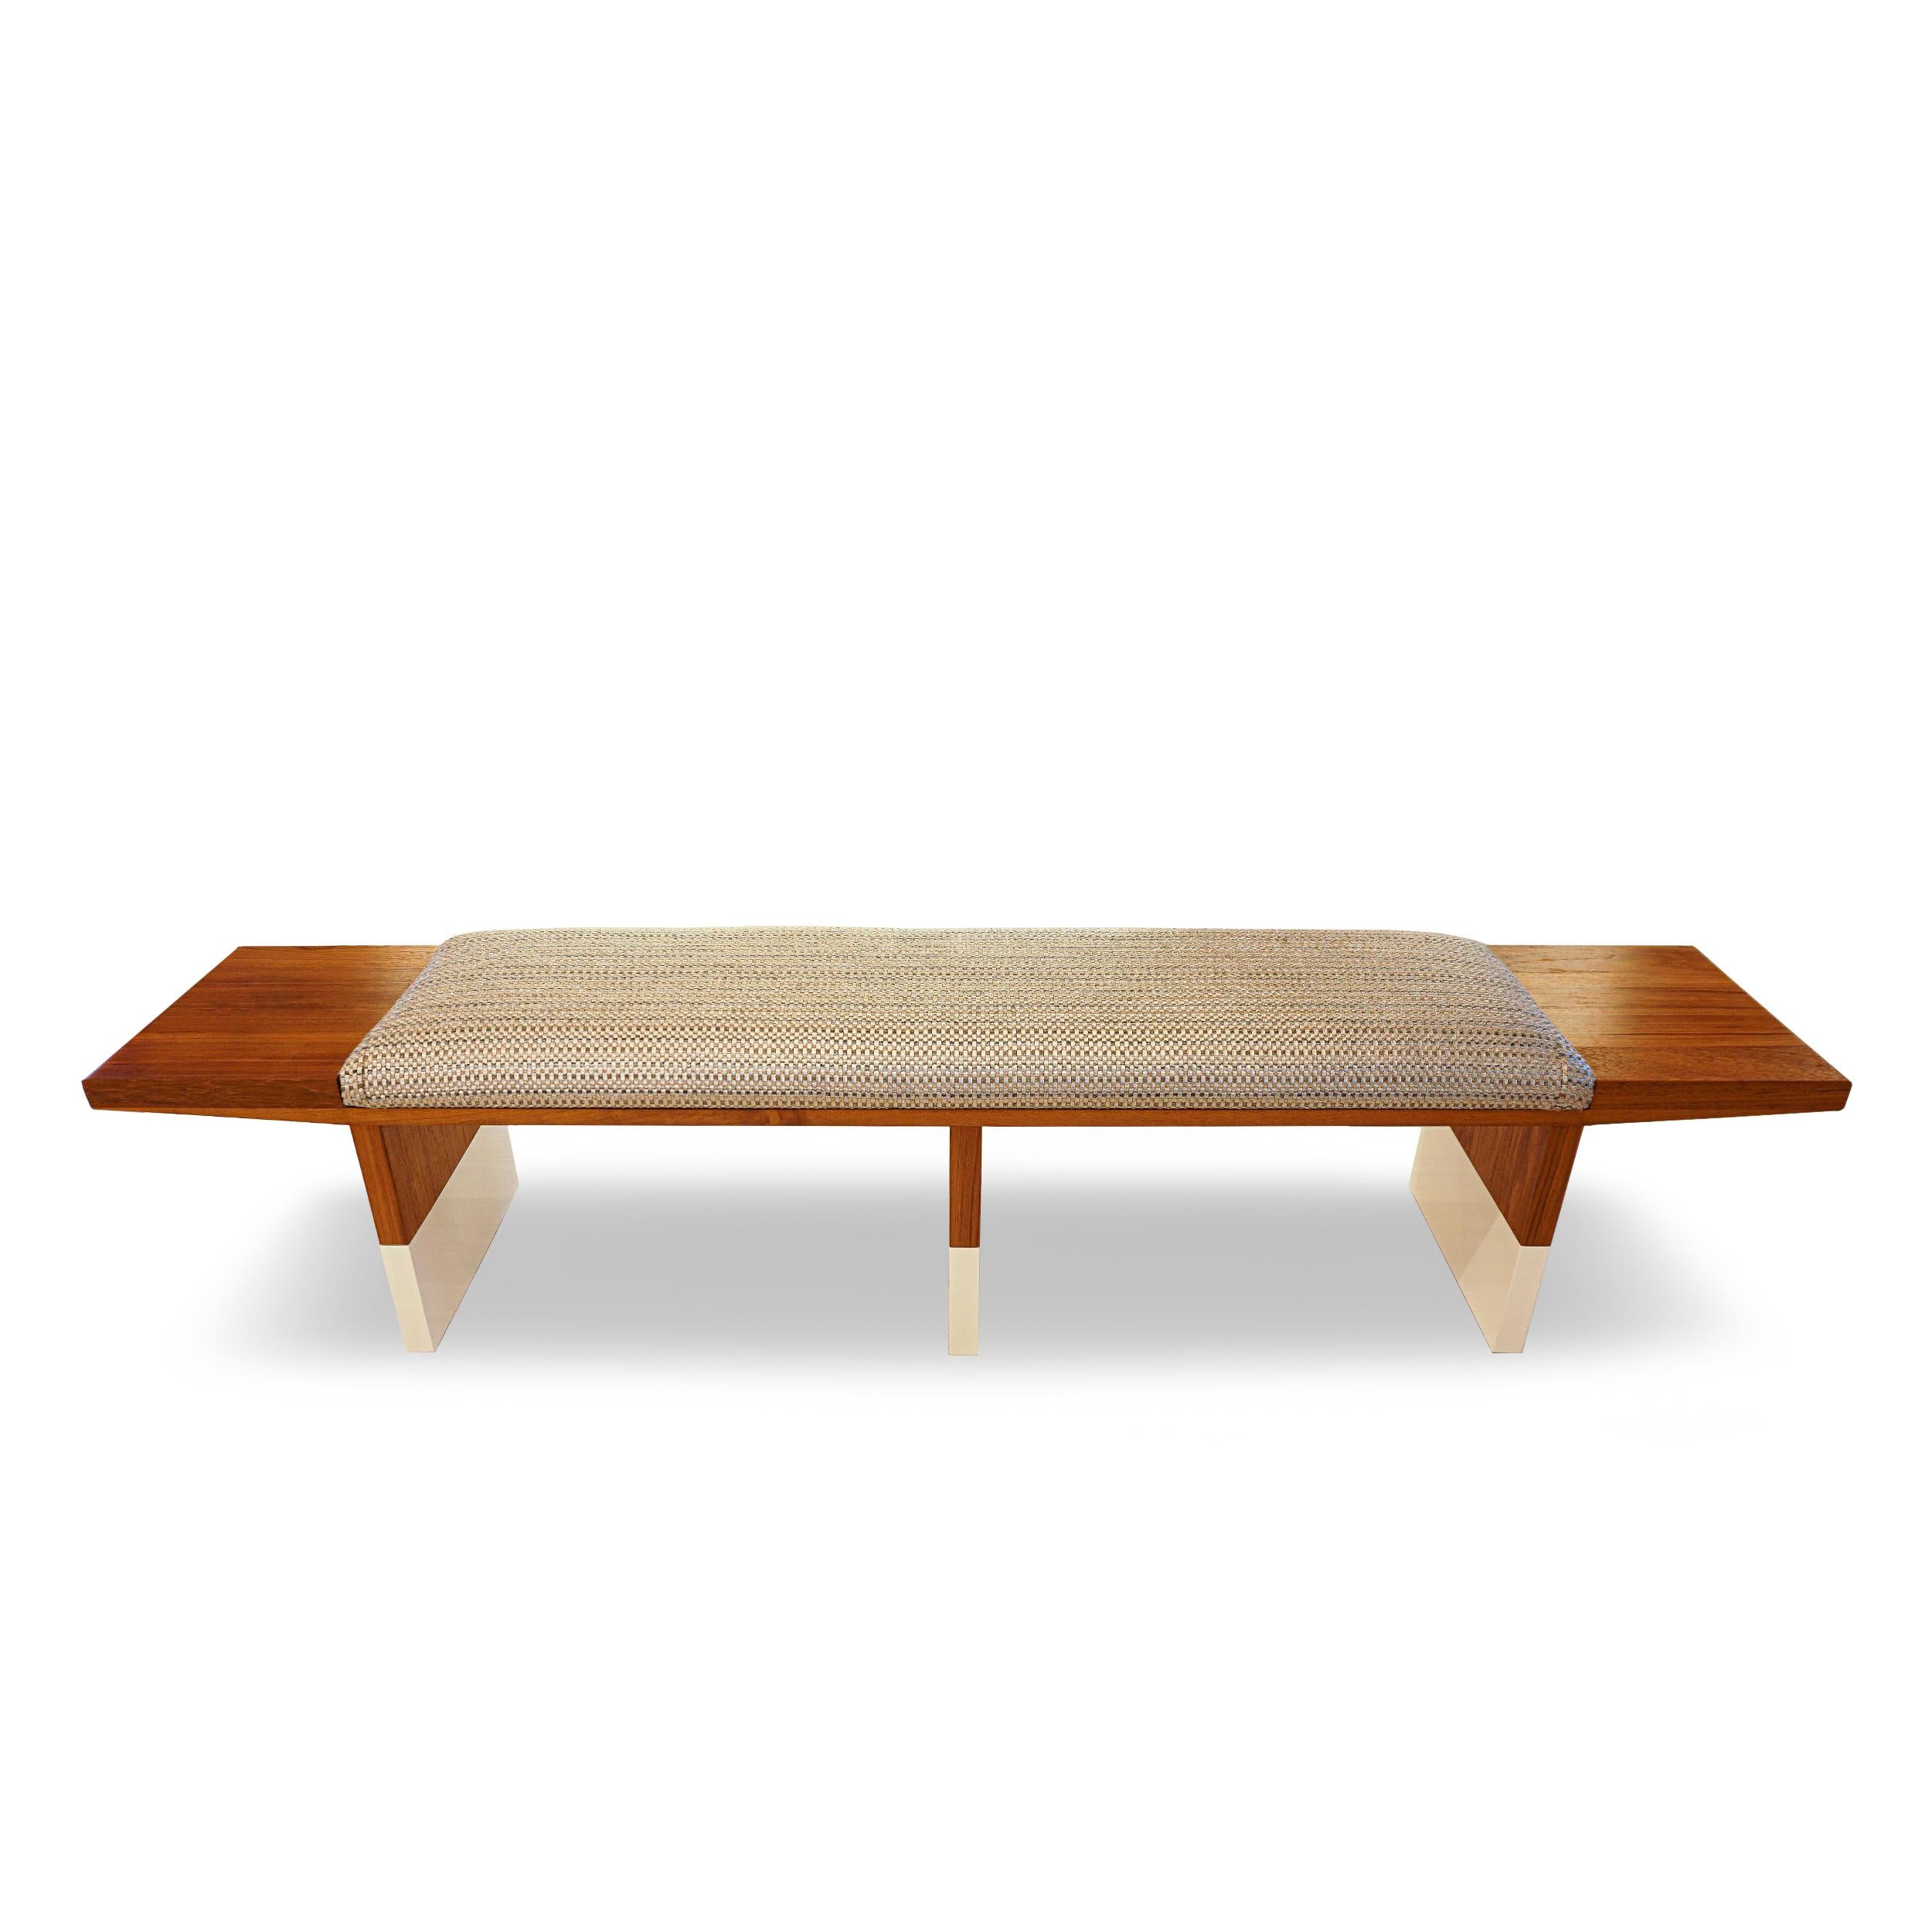 Modern Mid-Century Inspired Teak Bench with White Lacquer Dipped Legs For Sale